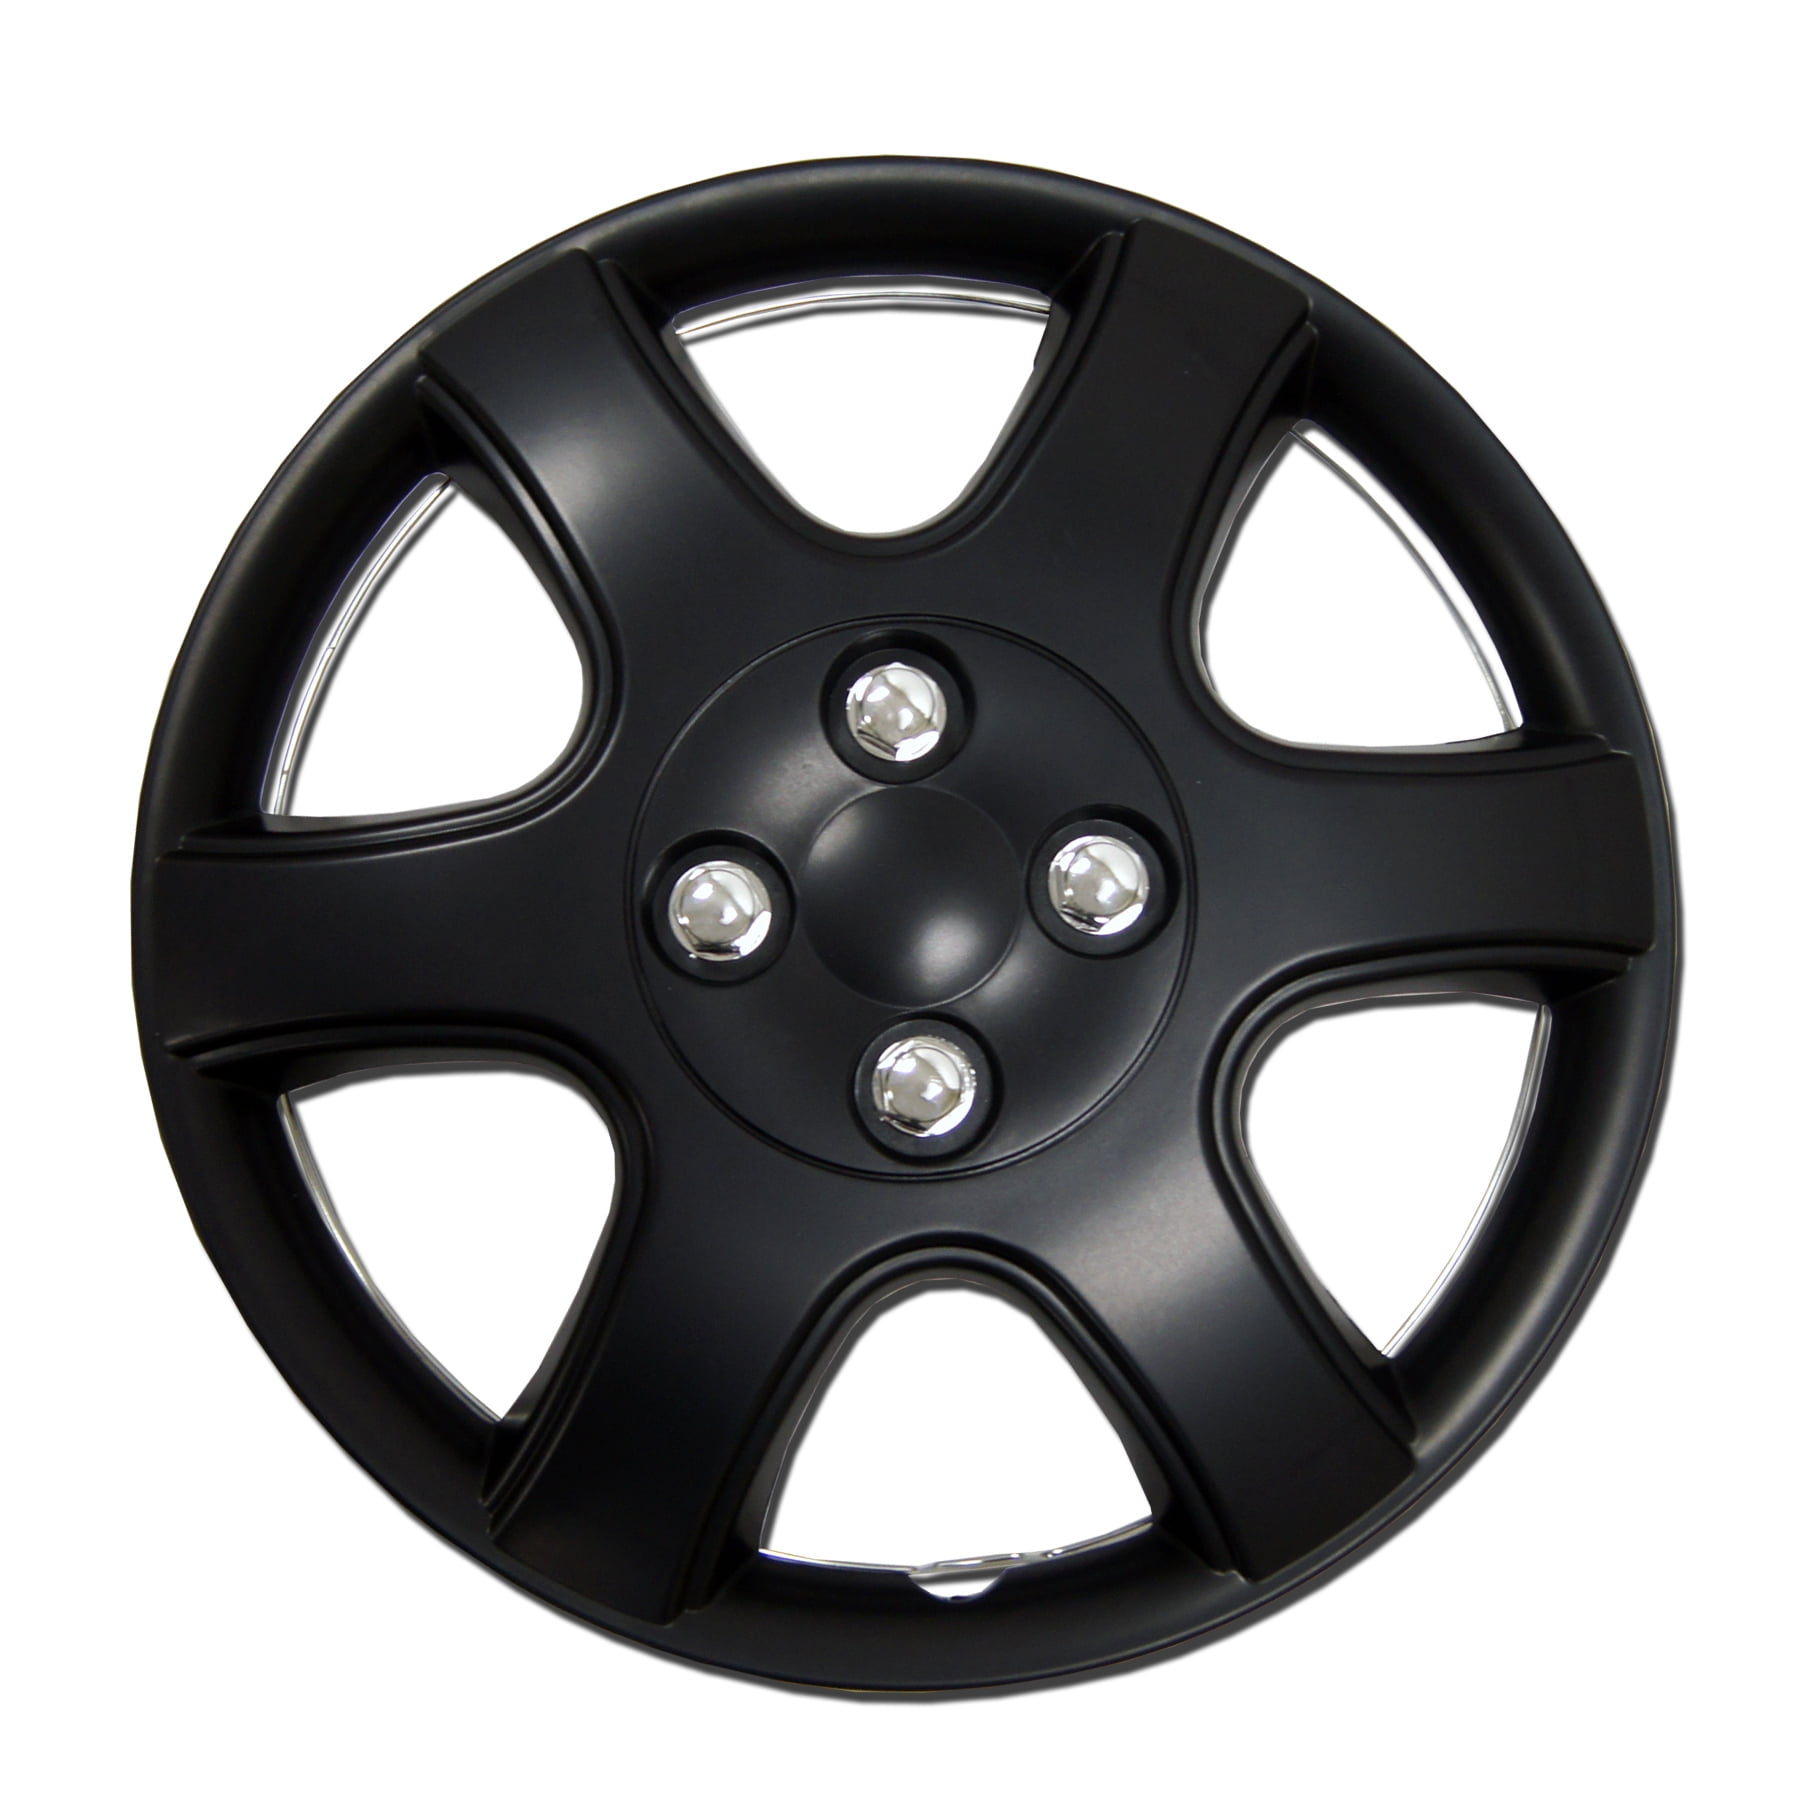 14-Inches Style Snap-On Type Matte Black Wheel Covers Hub-caps Tuningpros WC3-14-821-B Pack of 4 Hubcaps Pop-On 